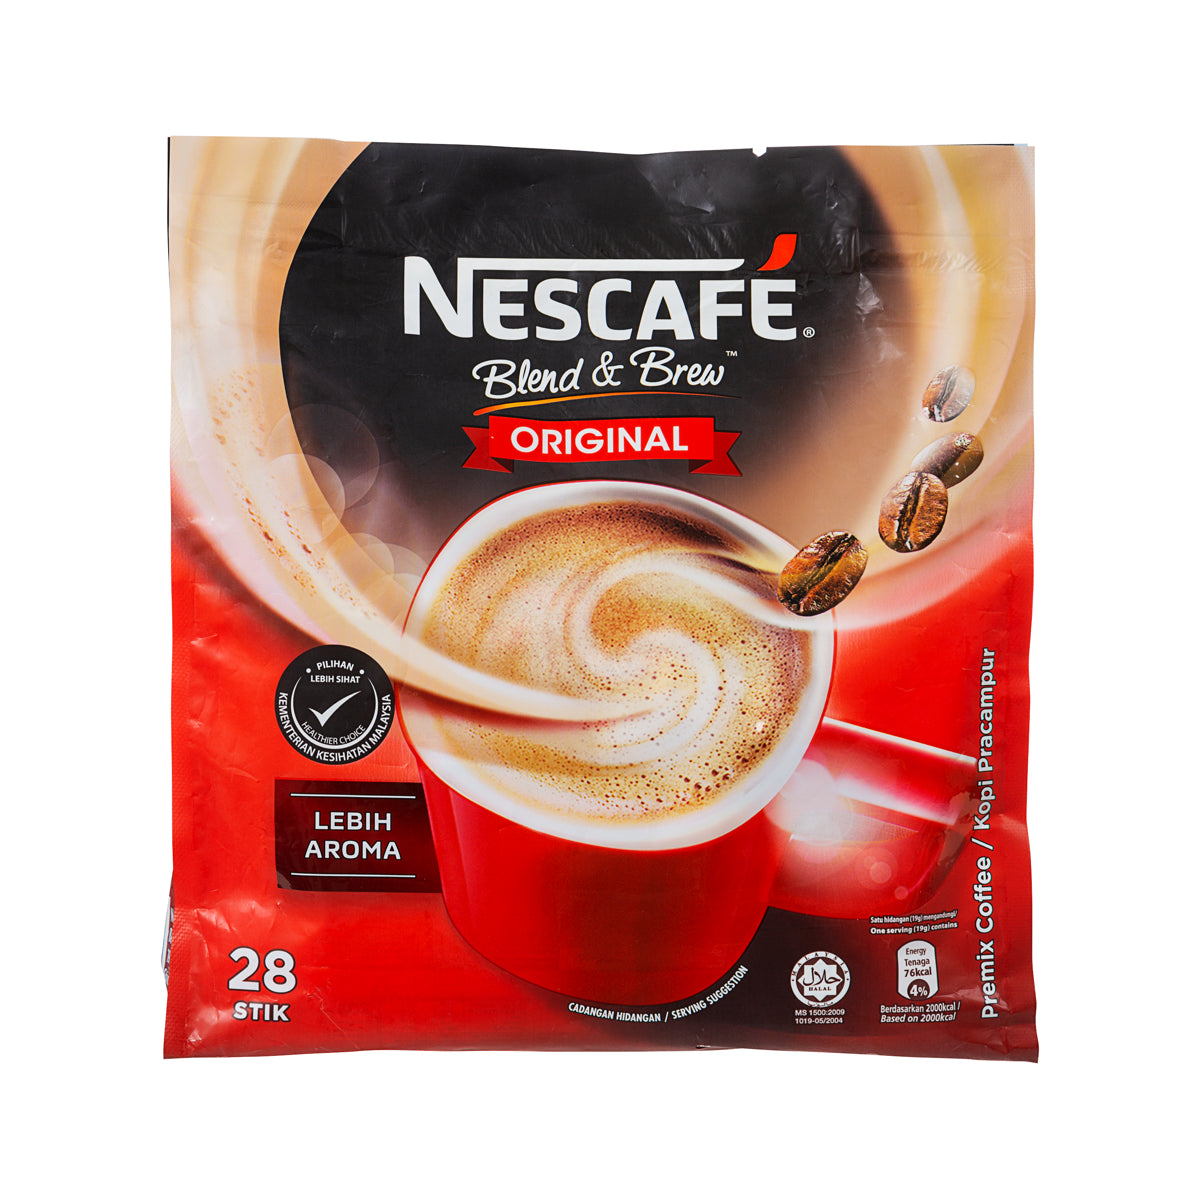 Nescafe 3 in 1 Creamy Latte Instant Coofee Packets 150g 